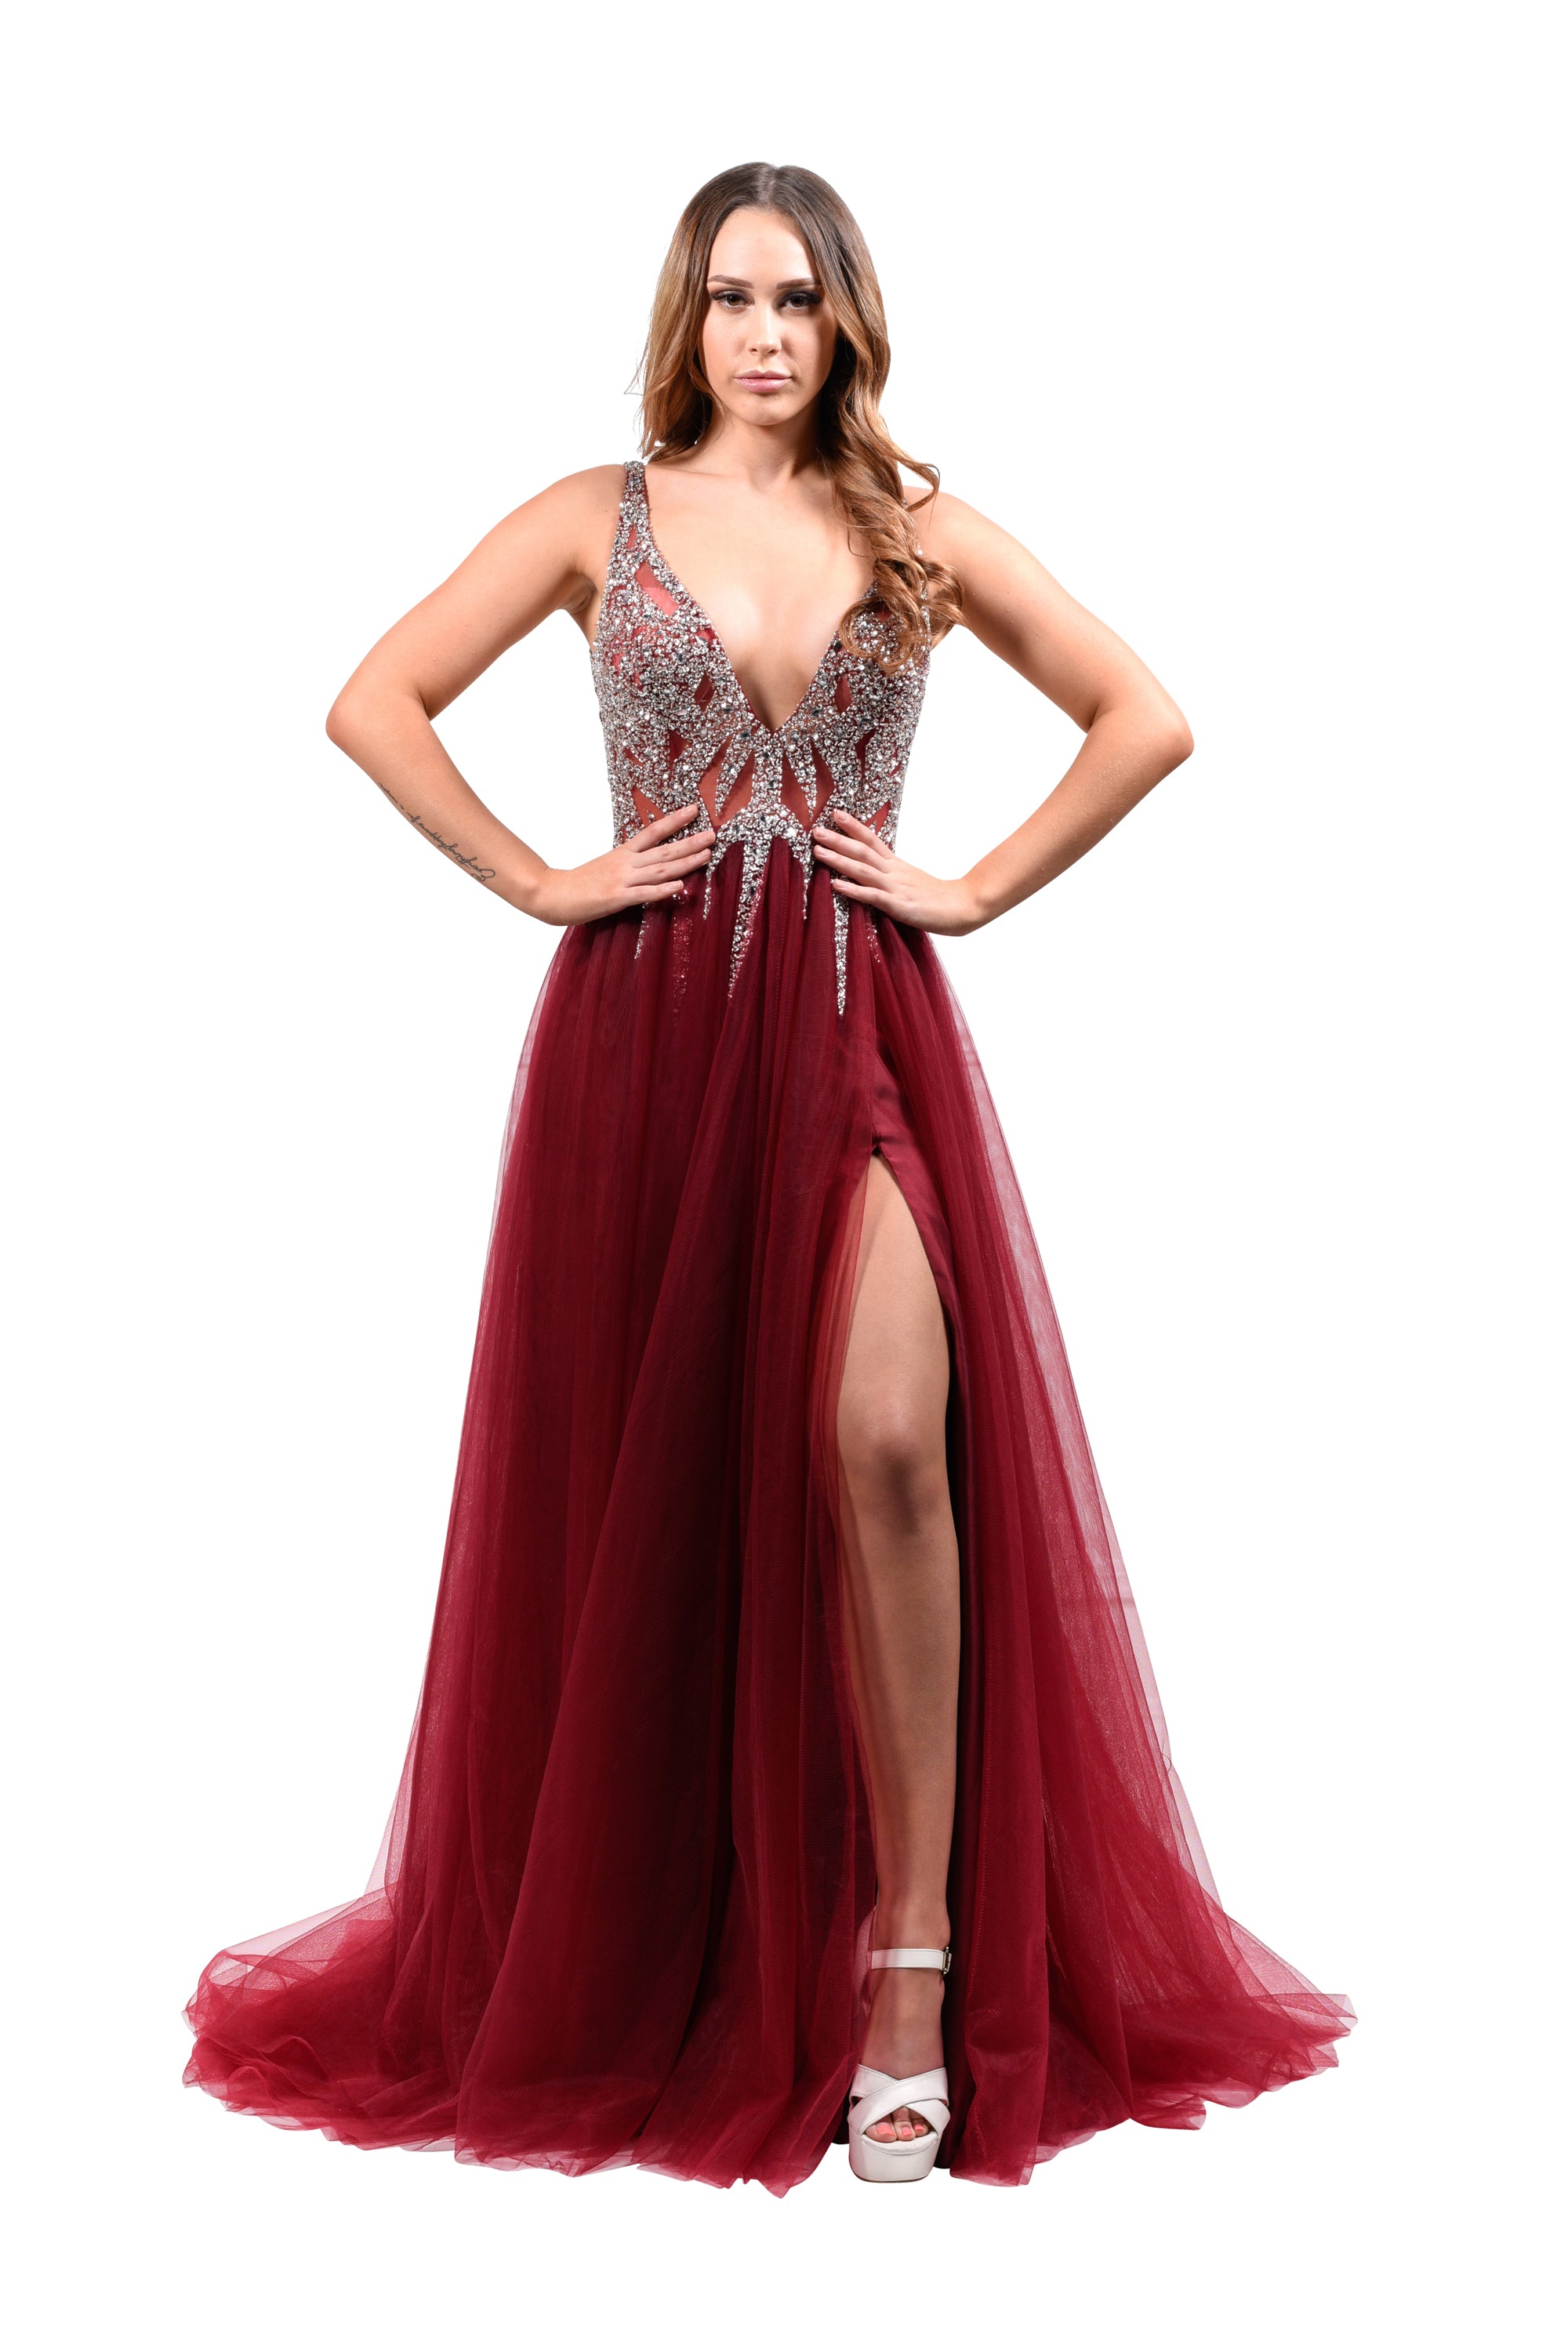 Honey Couture LINA Crystal Tulle Formal Gown Private Label$ AfterPay Humm ZipPay LayBuy Sezzle